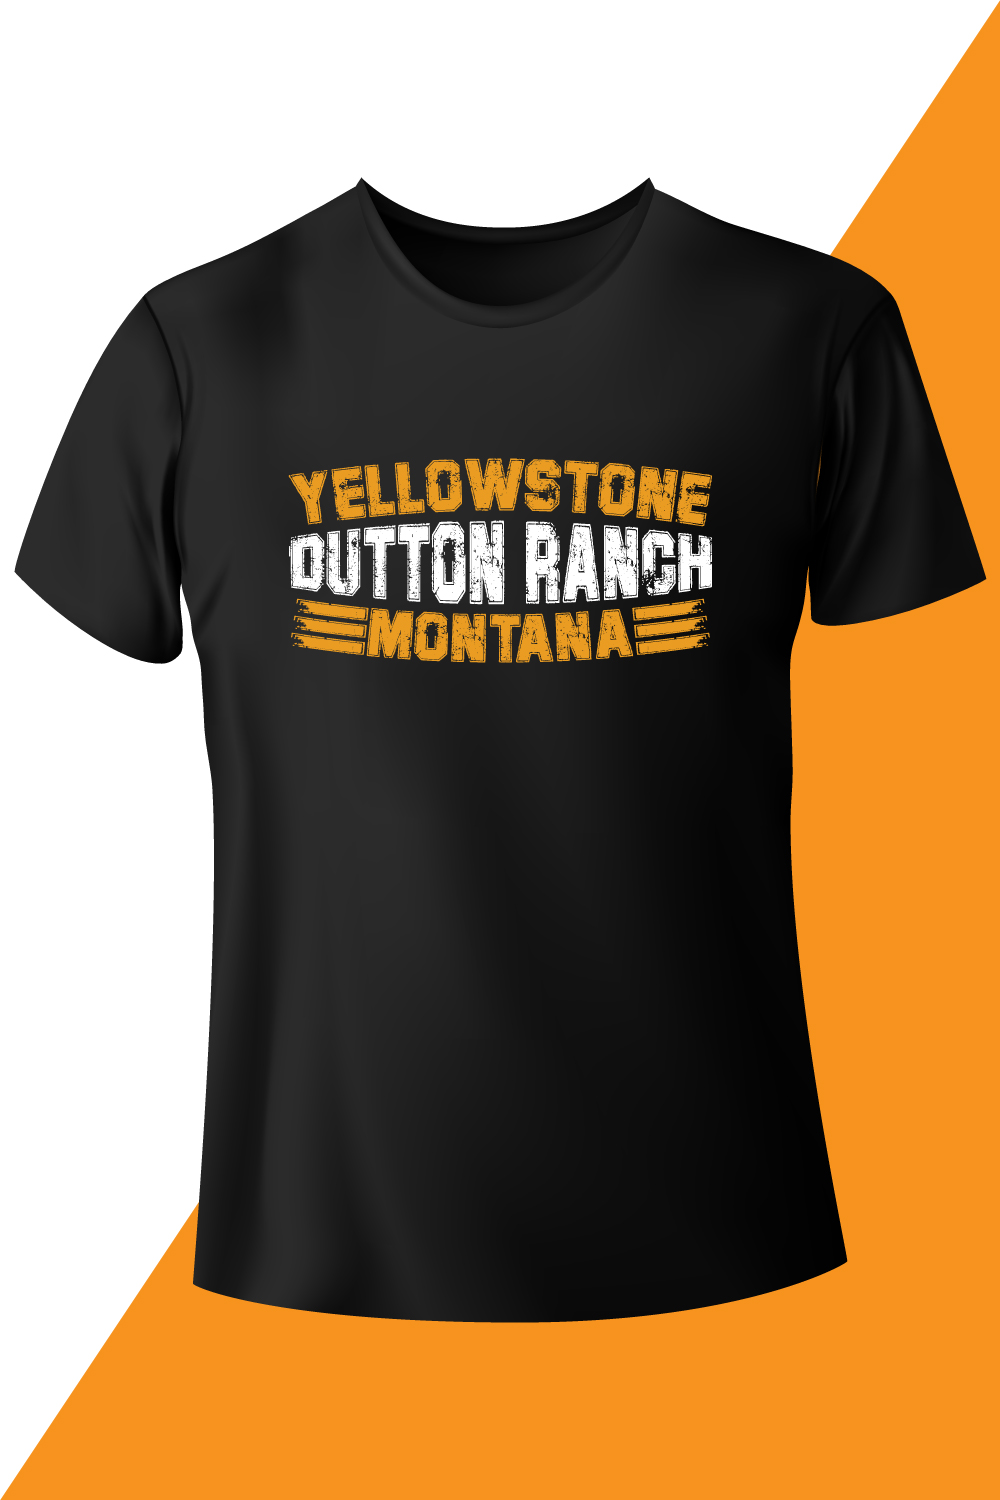 Image with black t-shirt with beautiful yellowstone dutton ranch montana lettering.